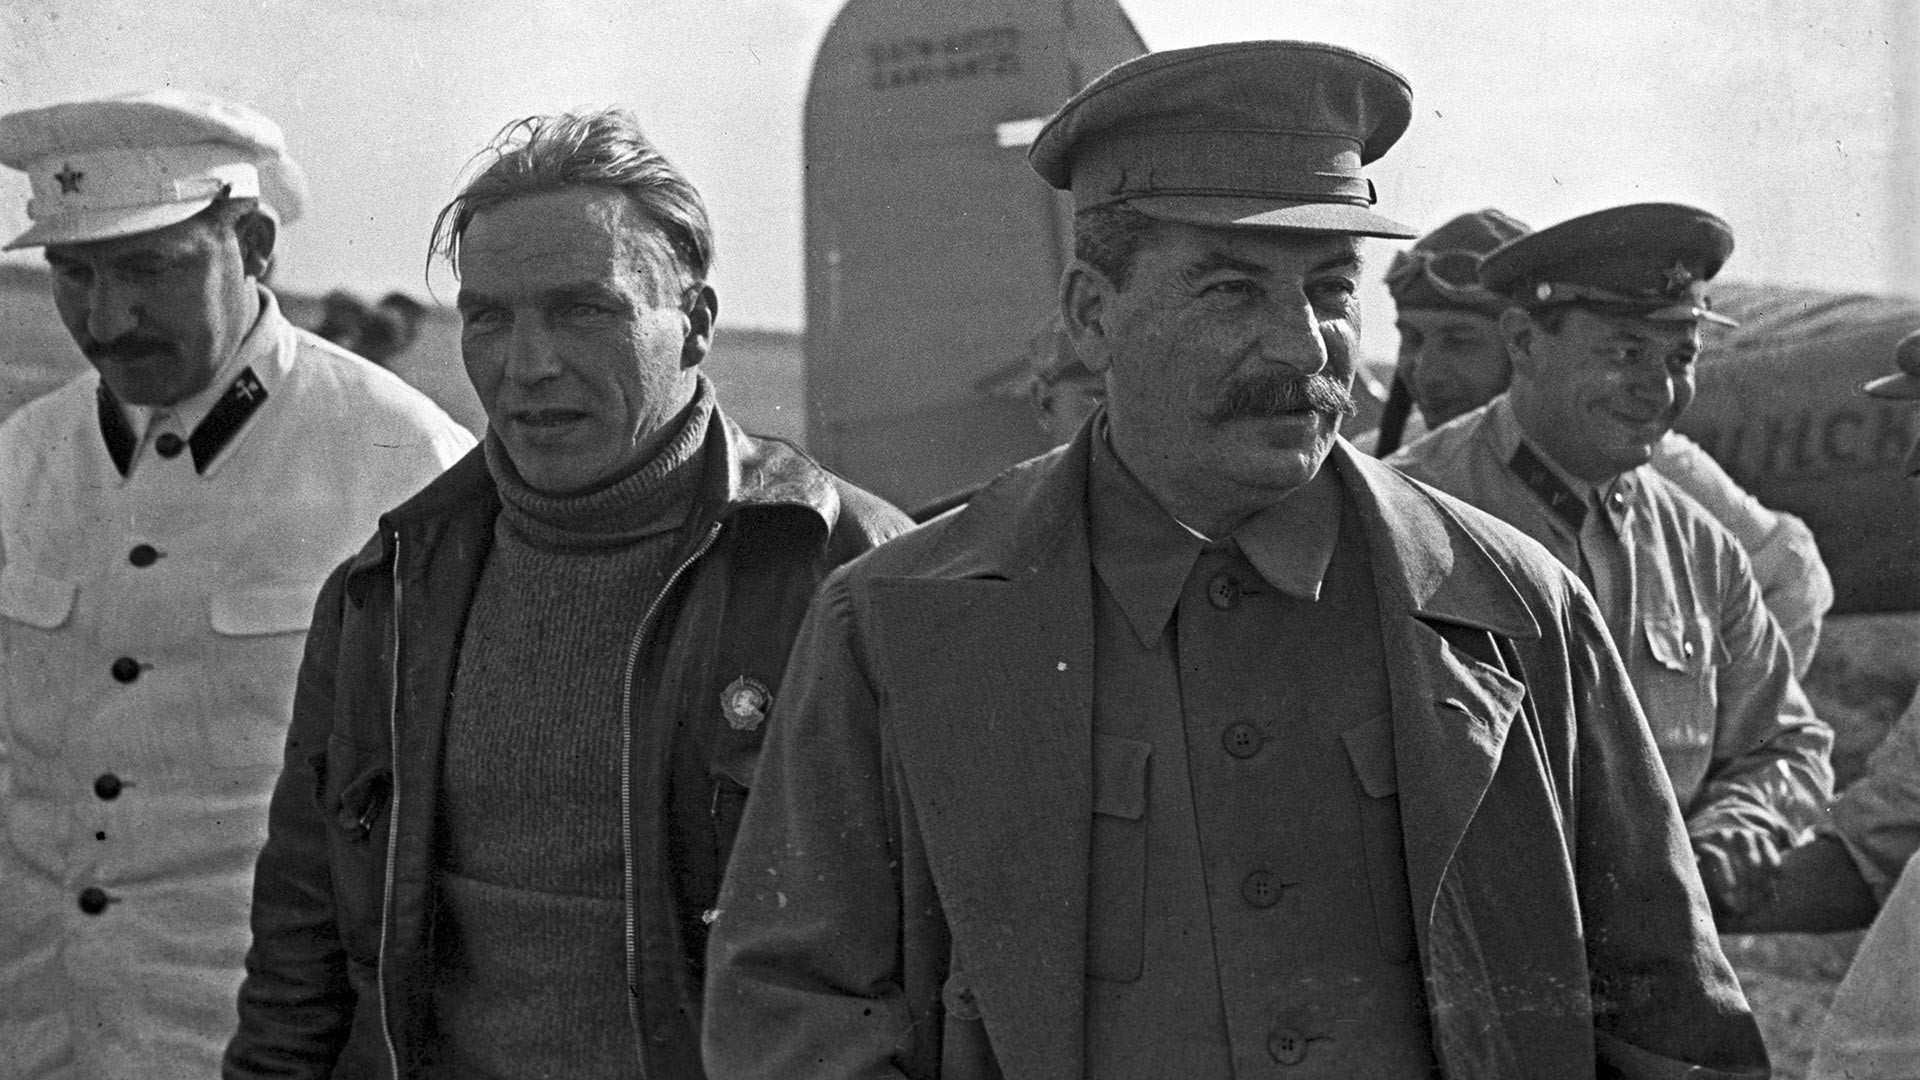 Stalin personally met the pilots upon their return to Moscow.